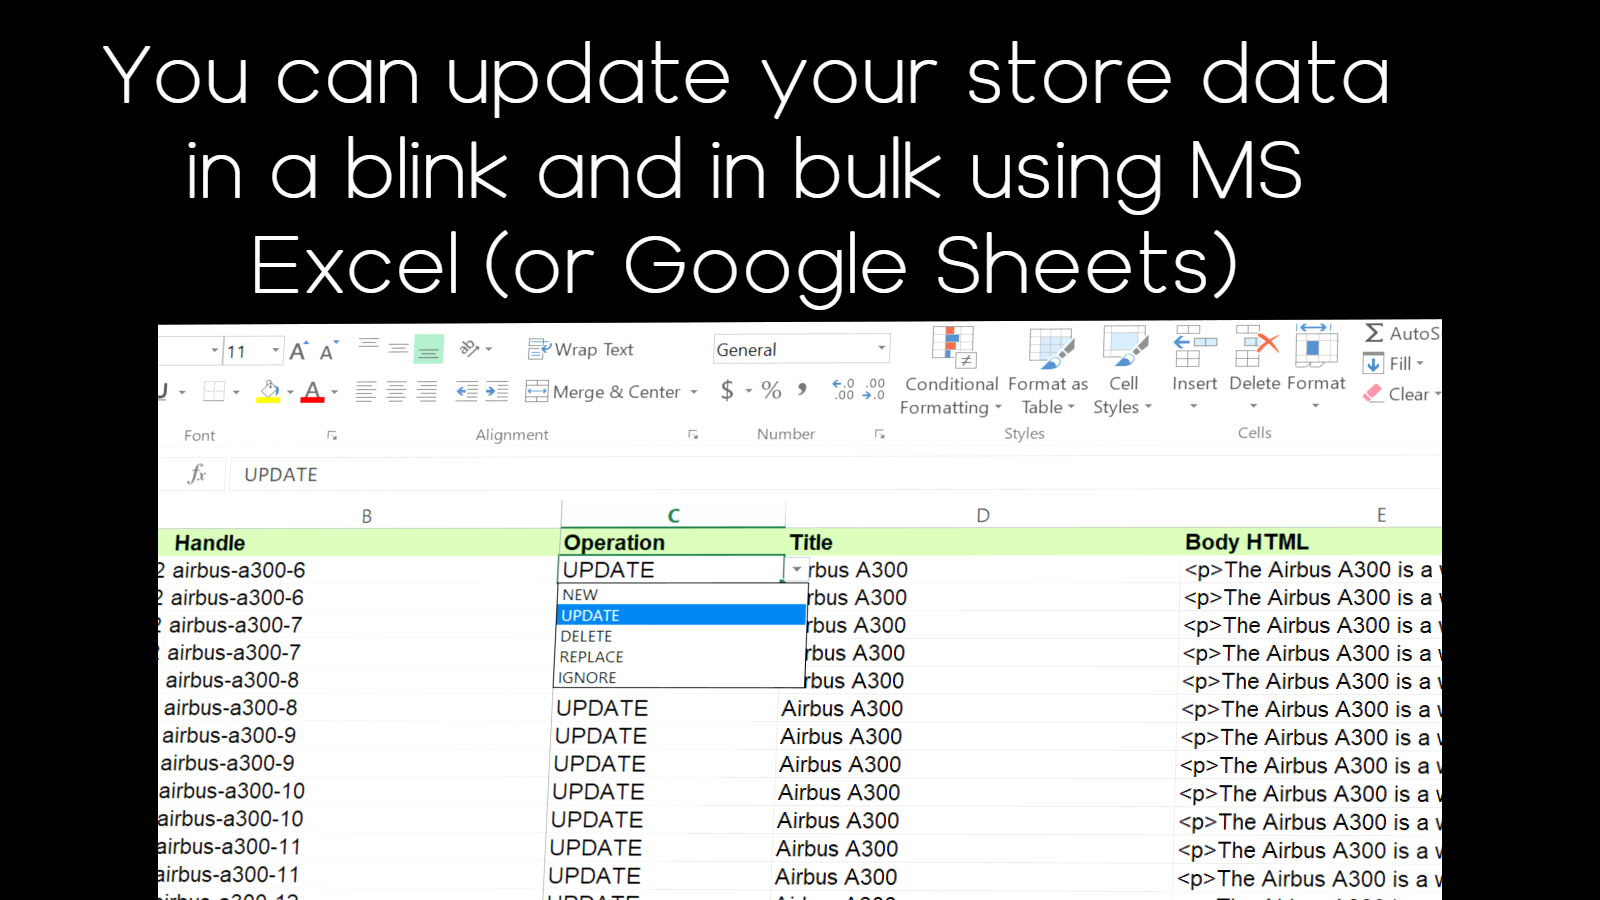 Bulk update, delete, insert items in your store using excel